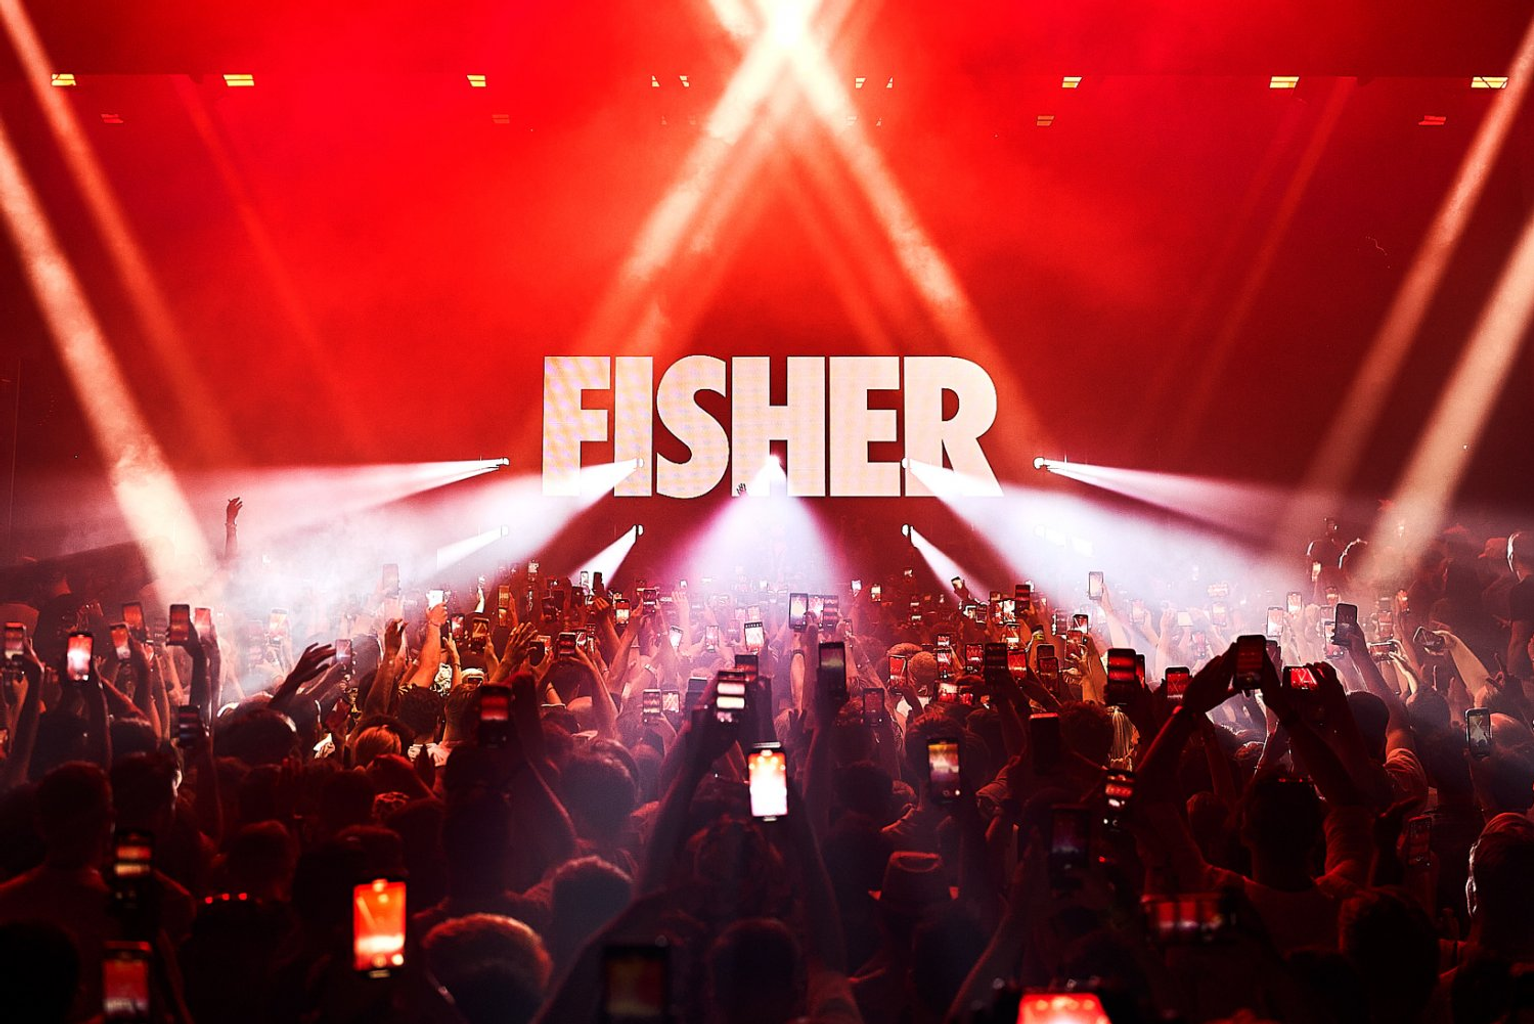 FISHER announces Hï Ibiza residency for summer 2022